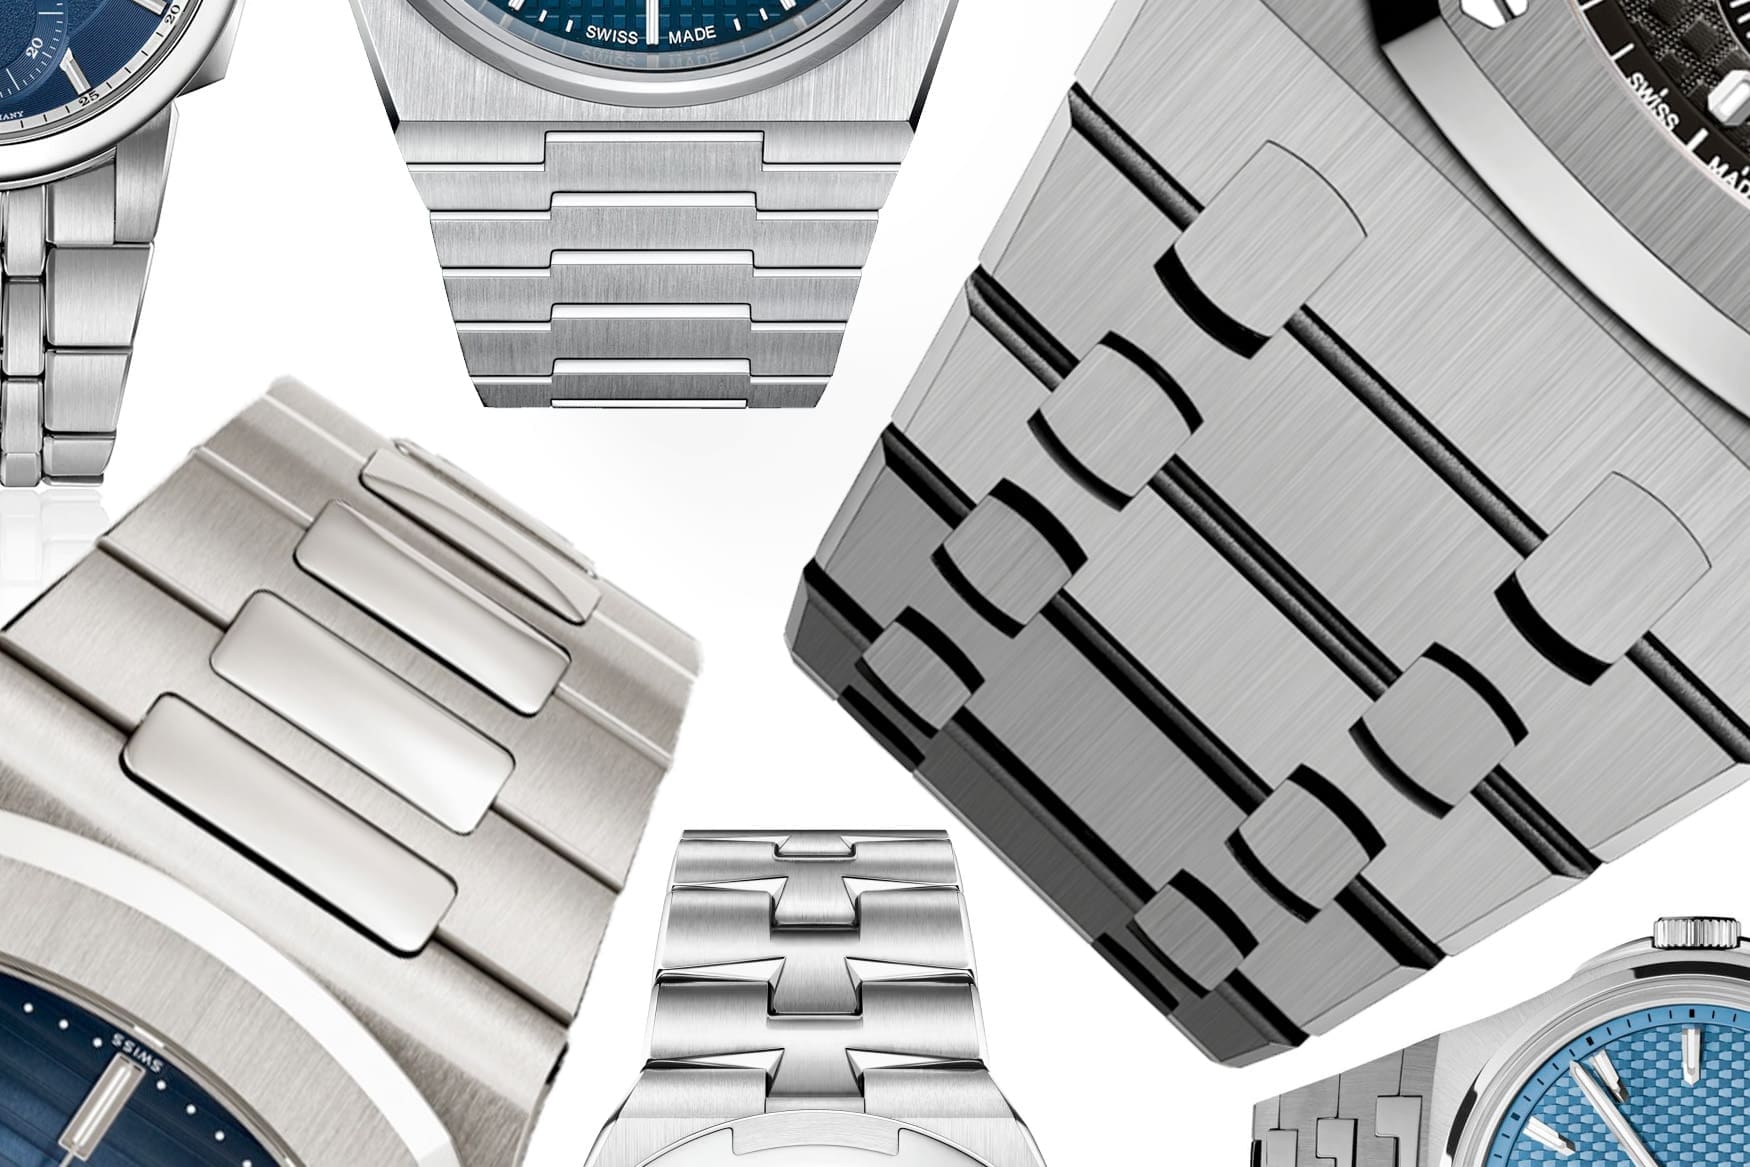 Integrated bracelet watches